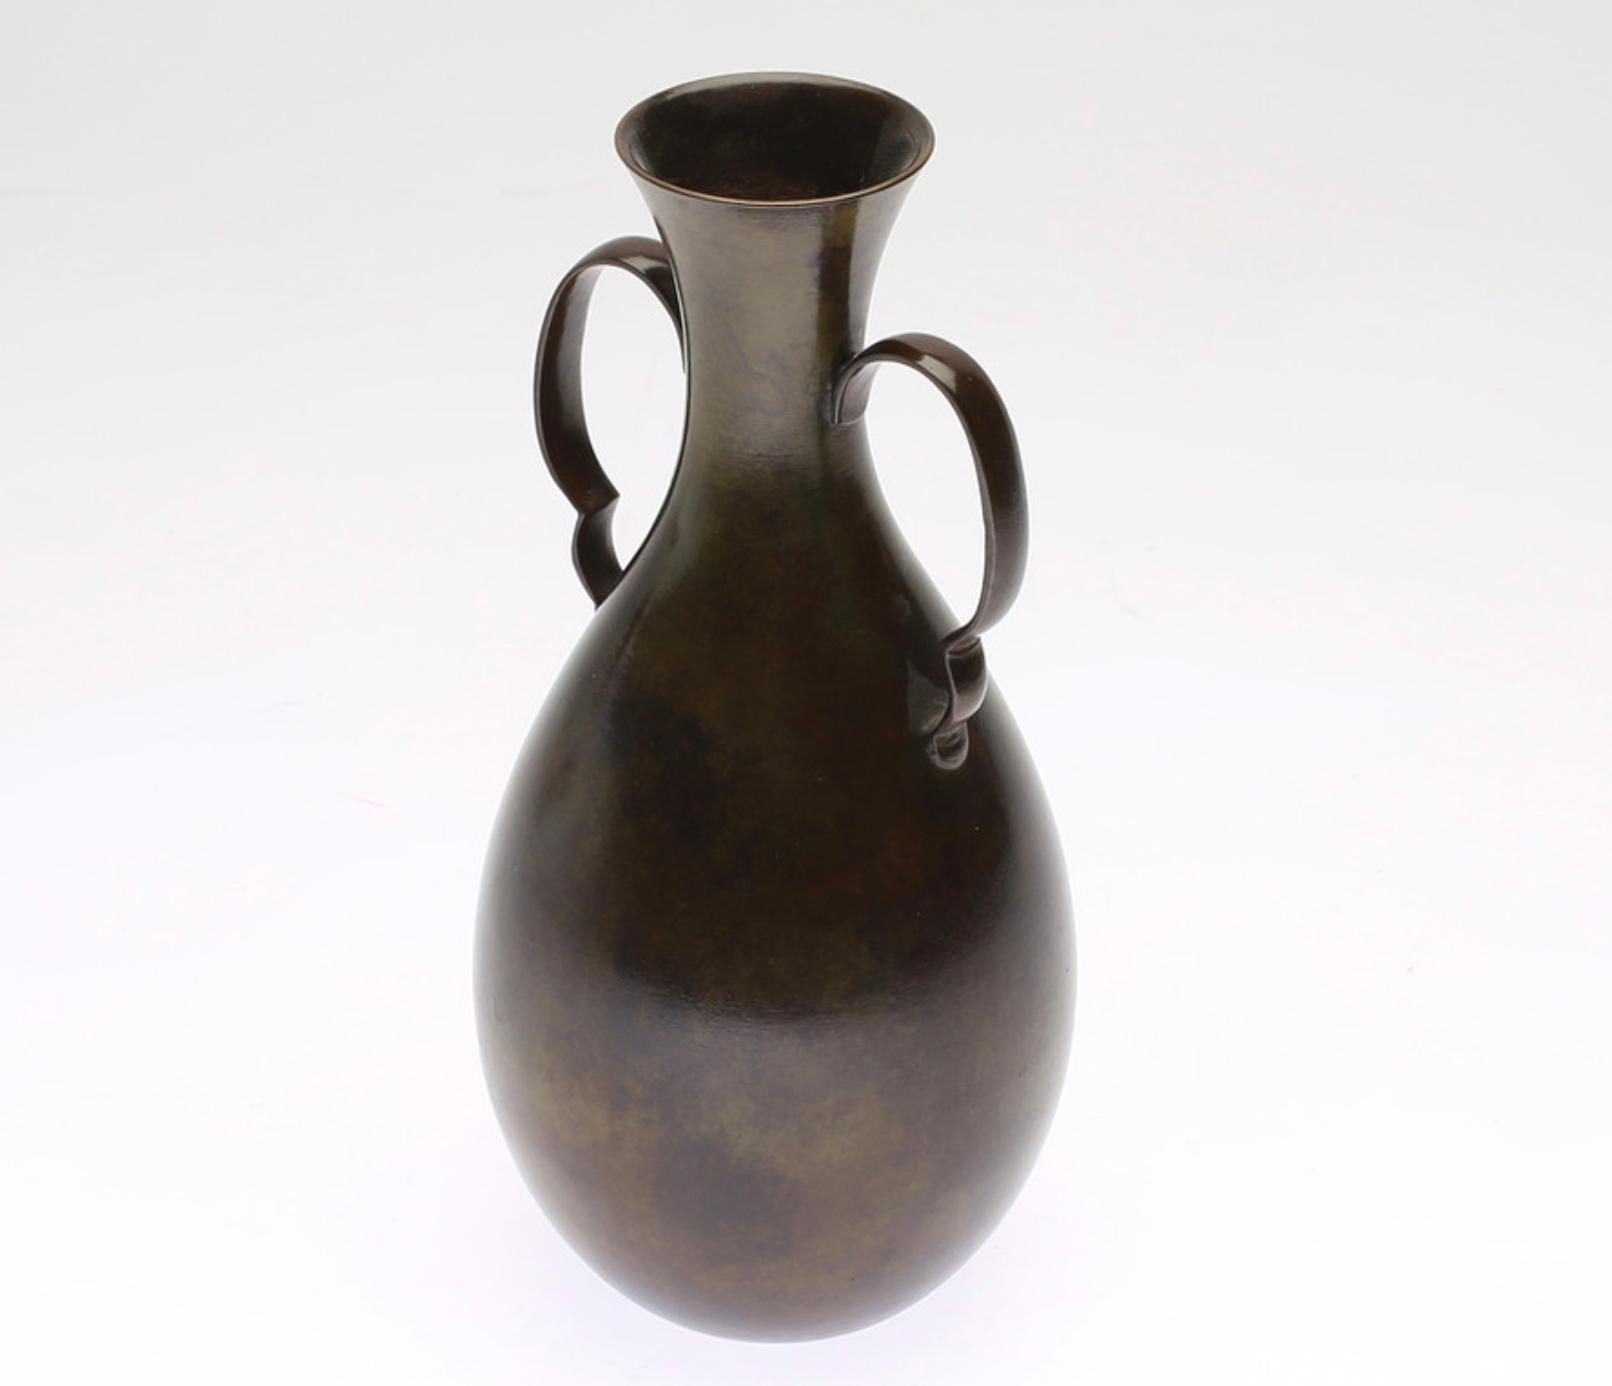 Patinated Bronze vase by Nyköping's Ciselör workshop. Sweden, Circa 1940th.
Marked by manufacturer. Small engraving on one side.